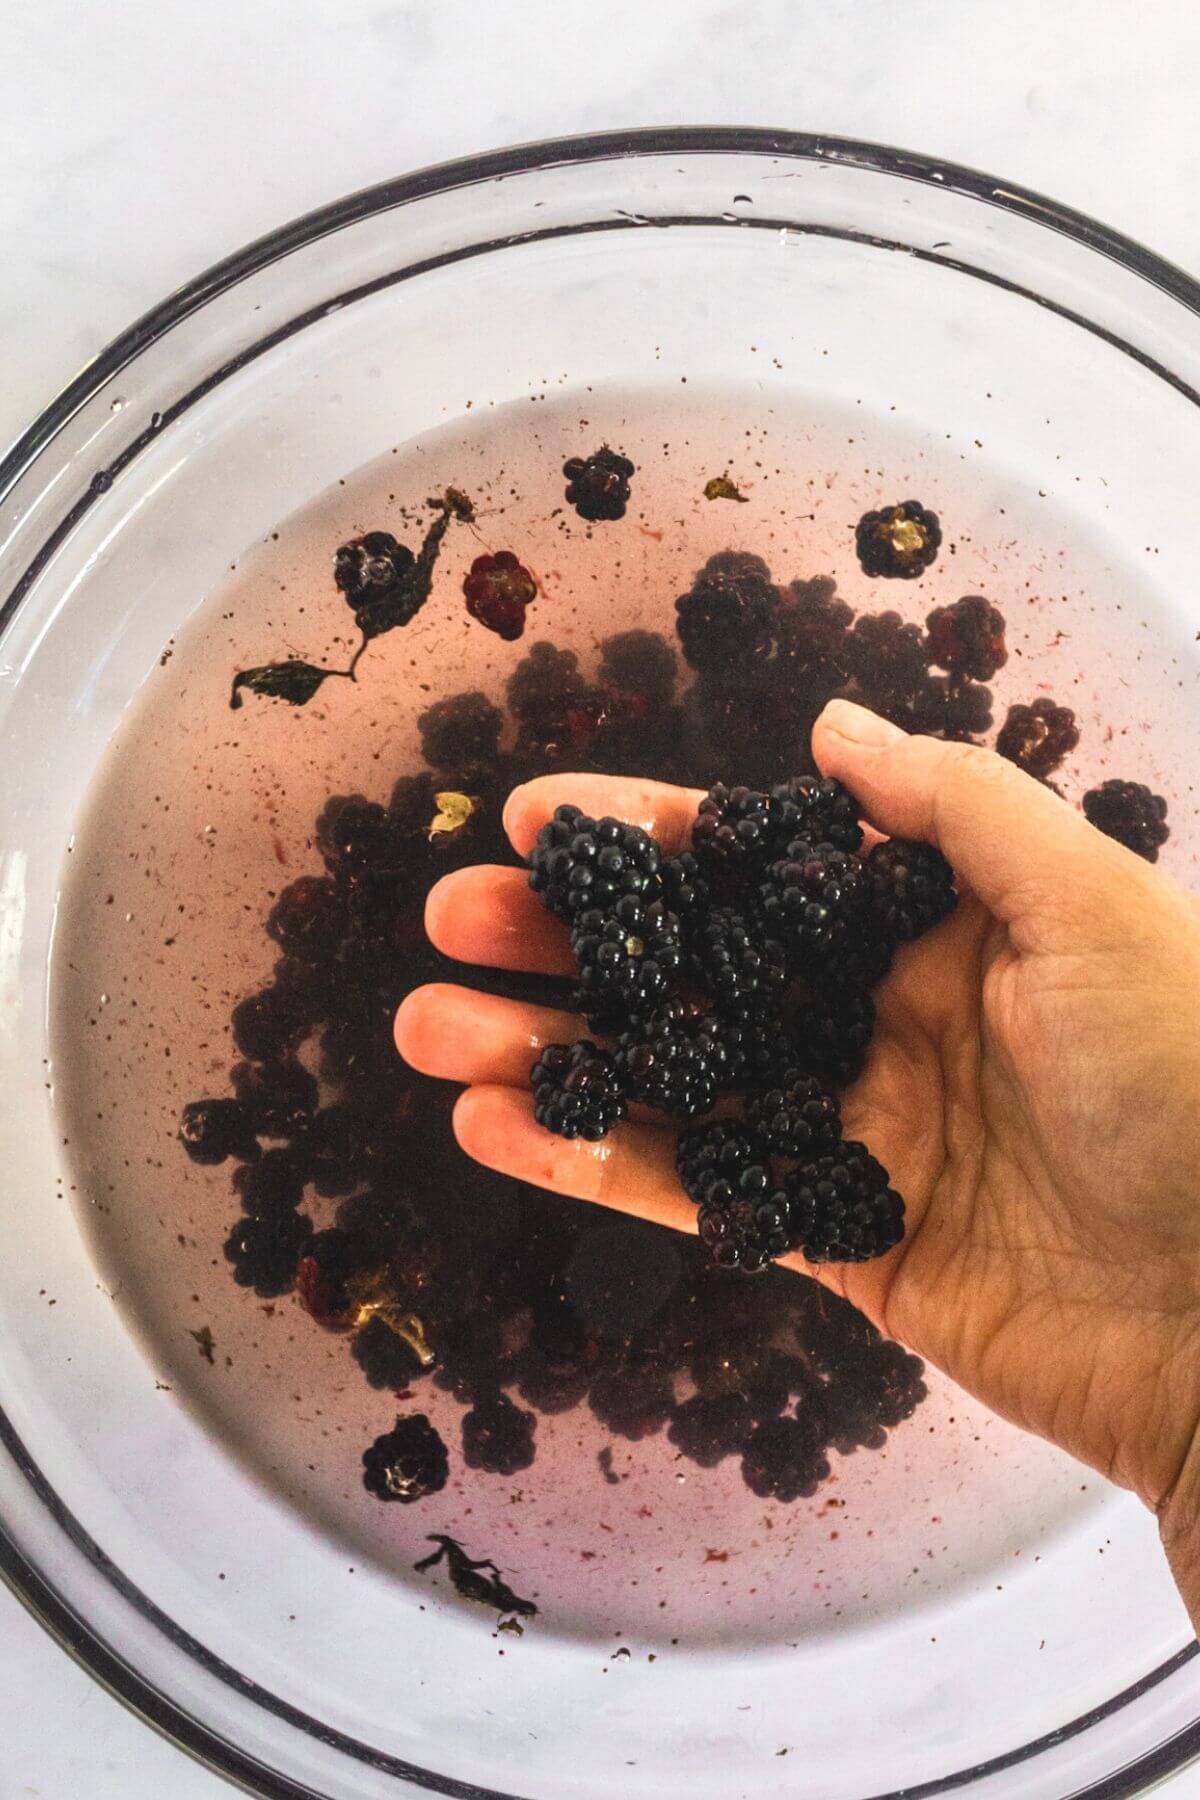 Fresh blackberries are in a bowl of water being washed. Someones right hand scoops out some berries.